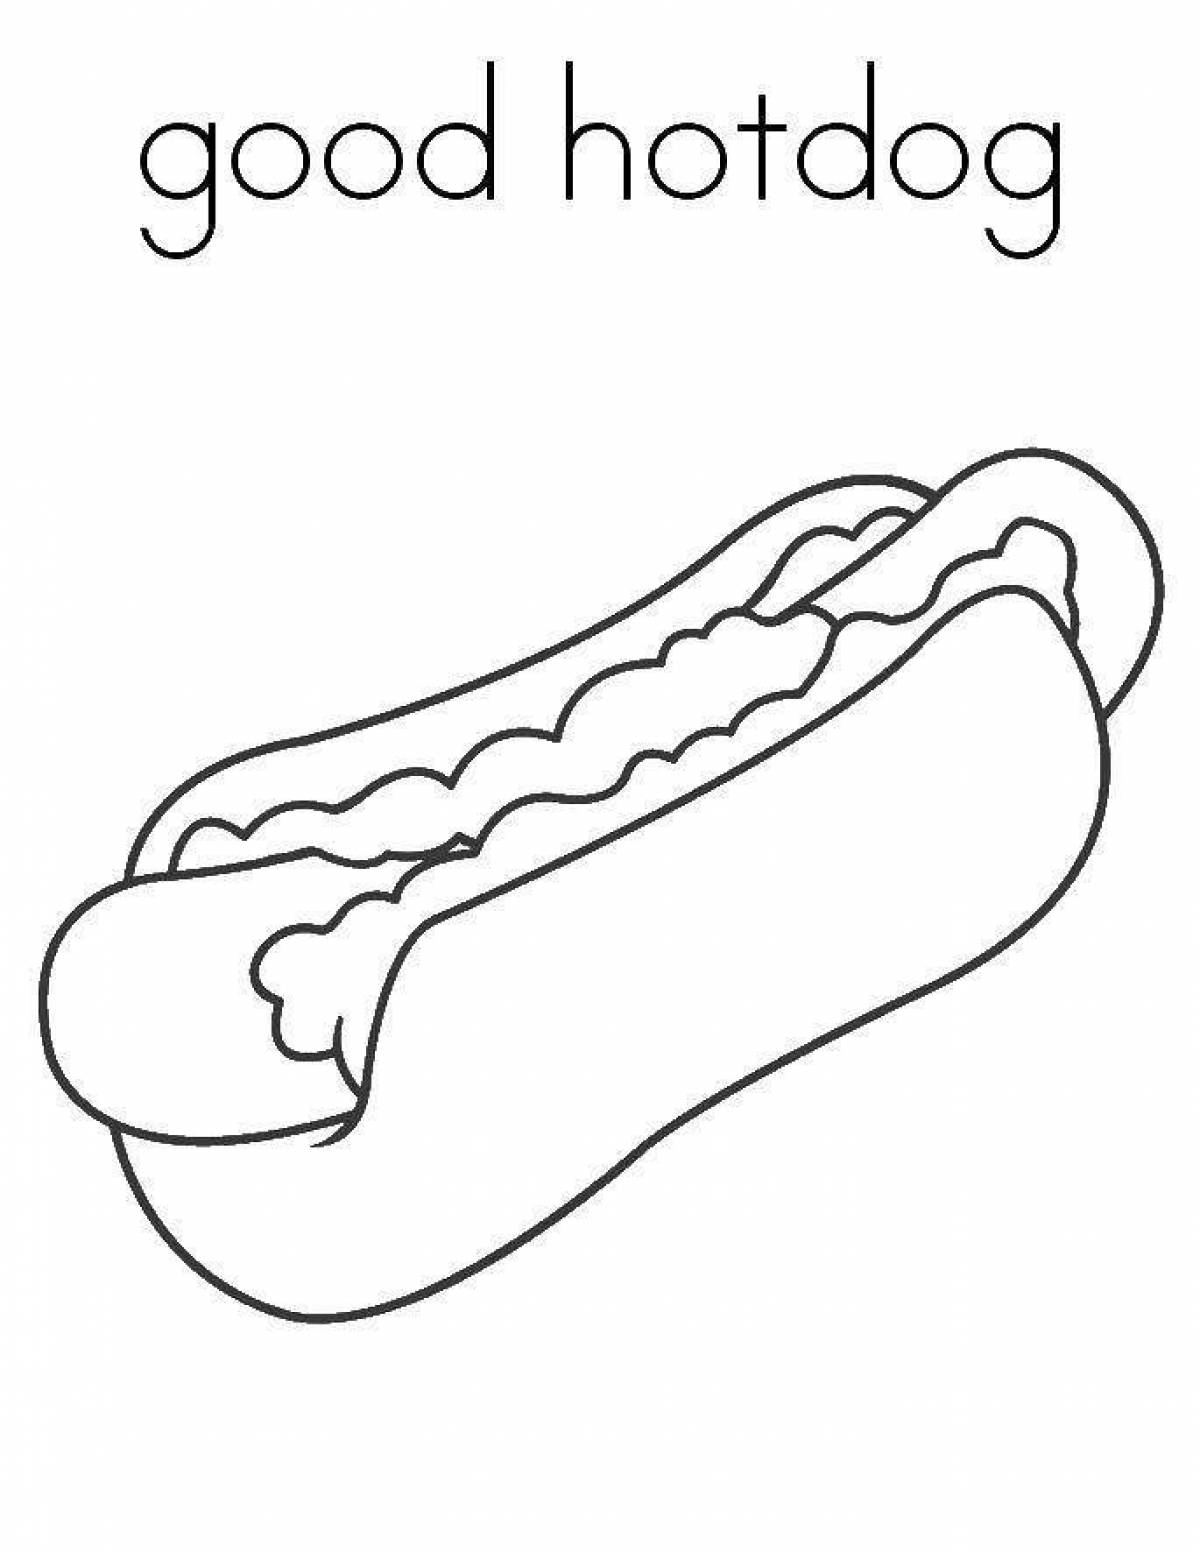 Amazing hot dog coloring page